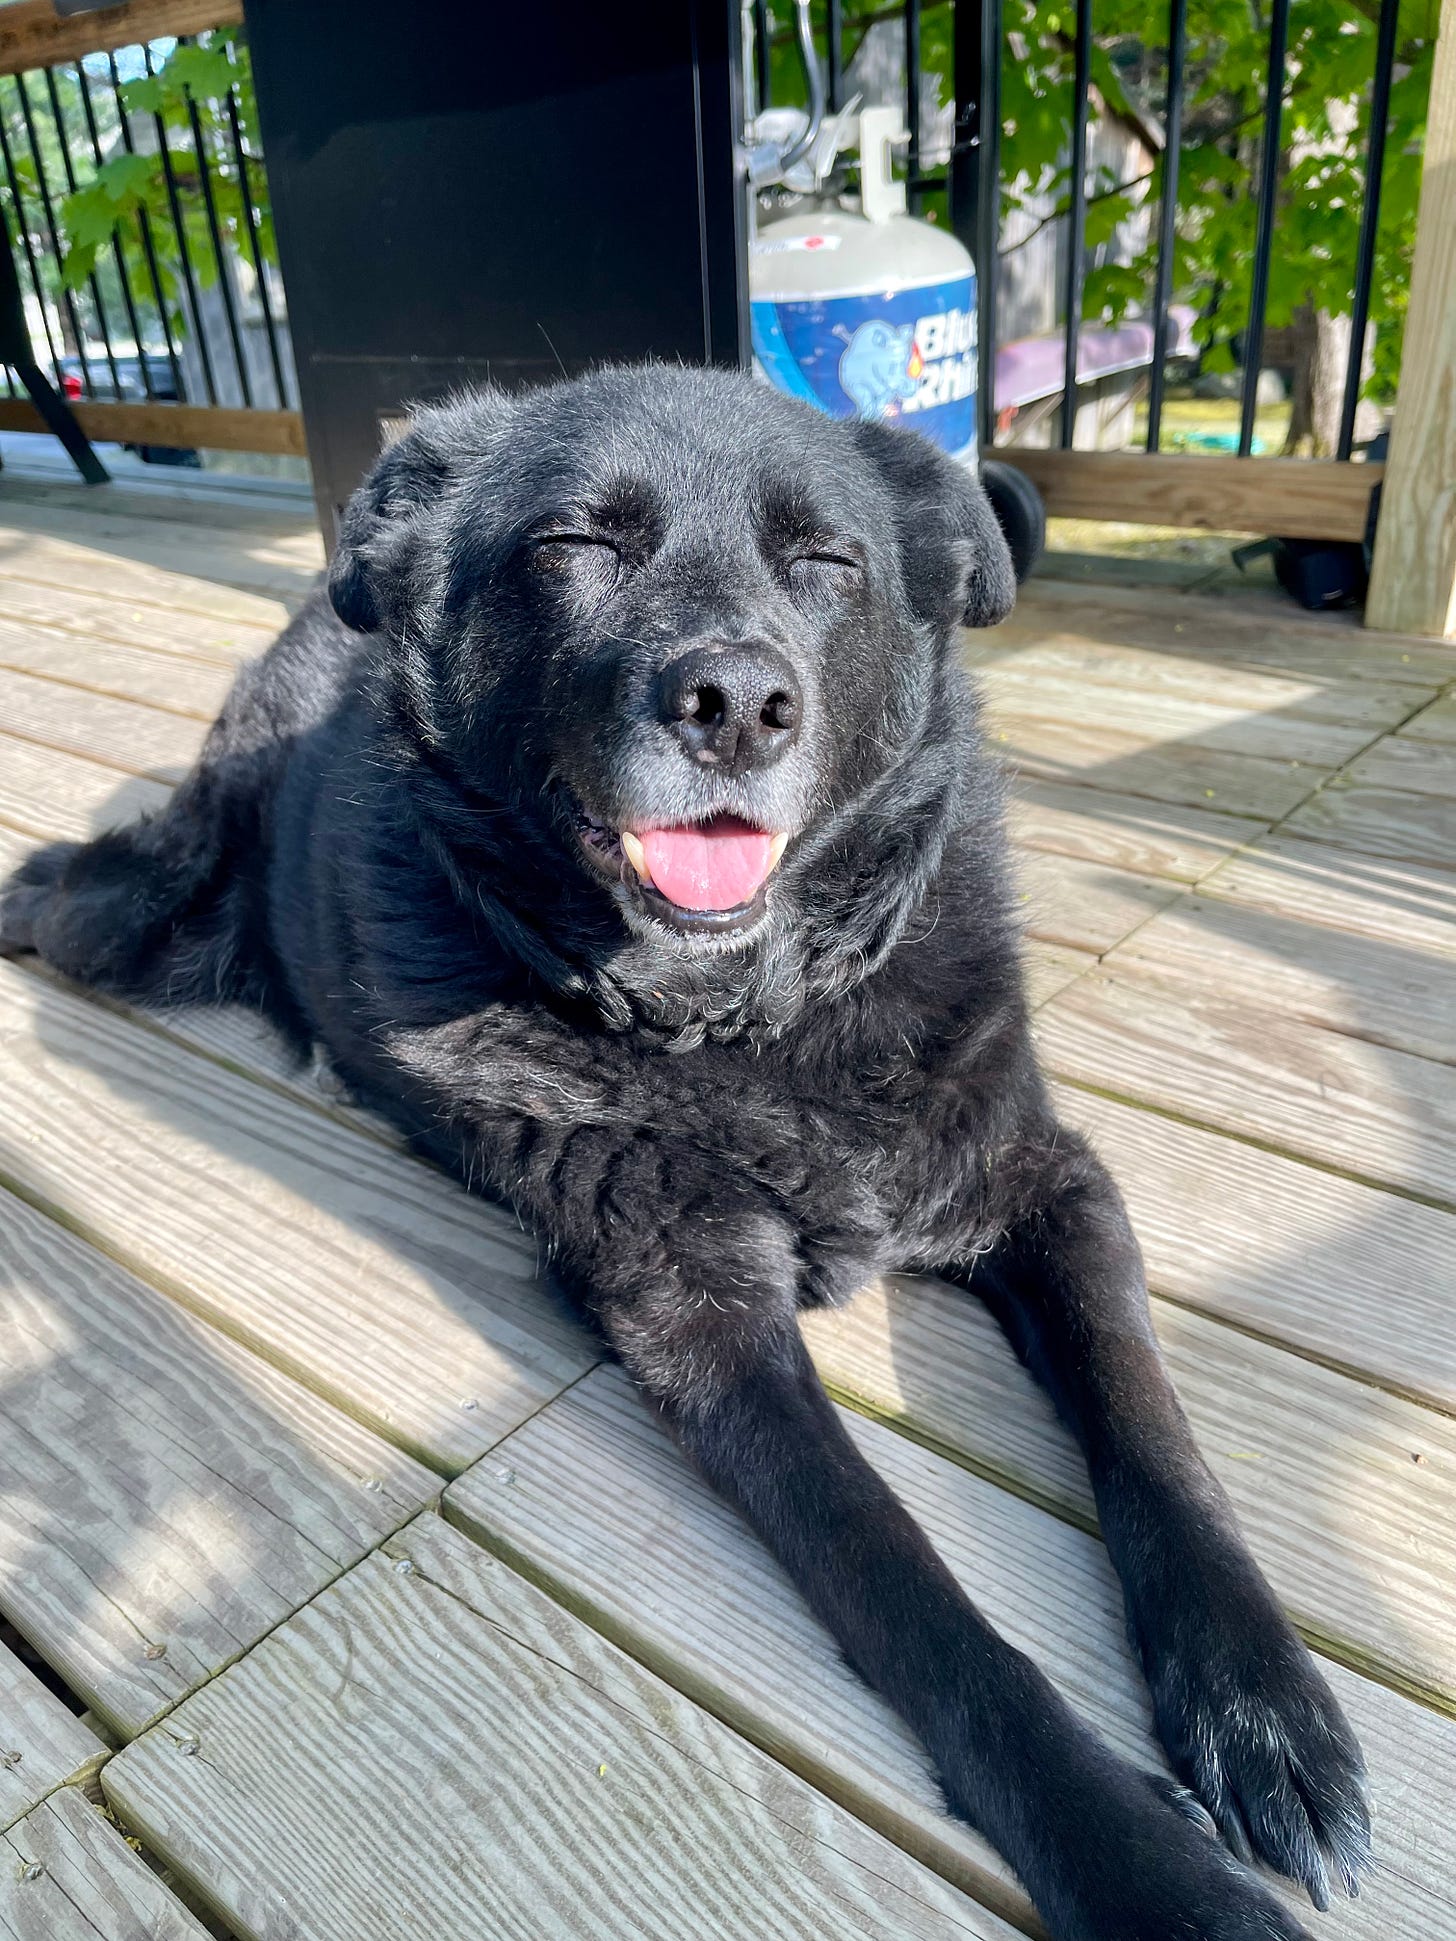 Dog smiling on a deck